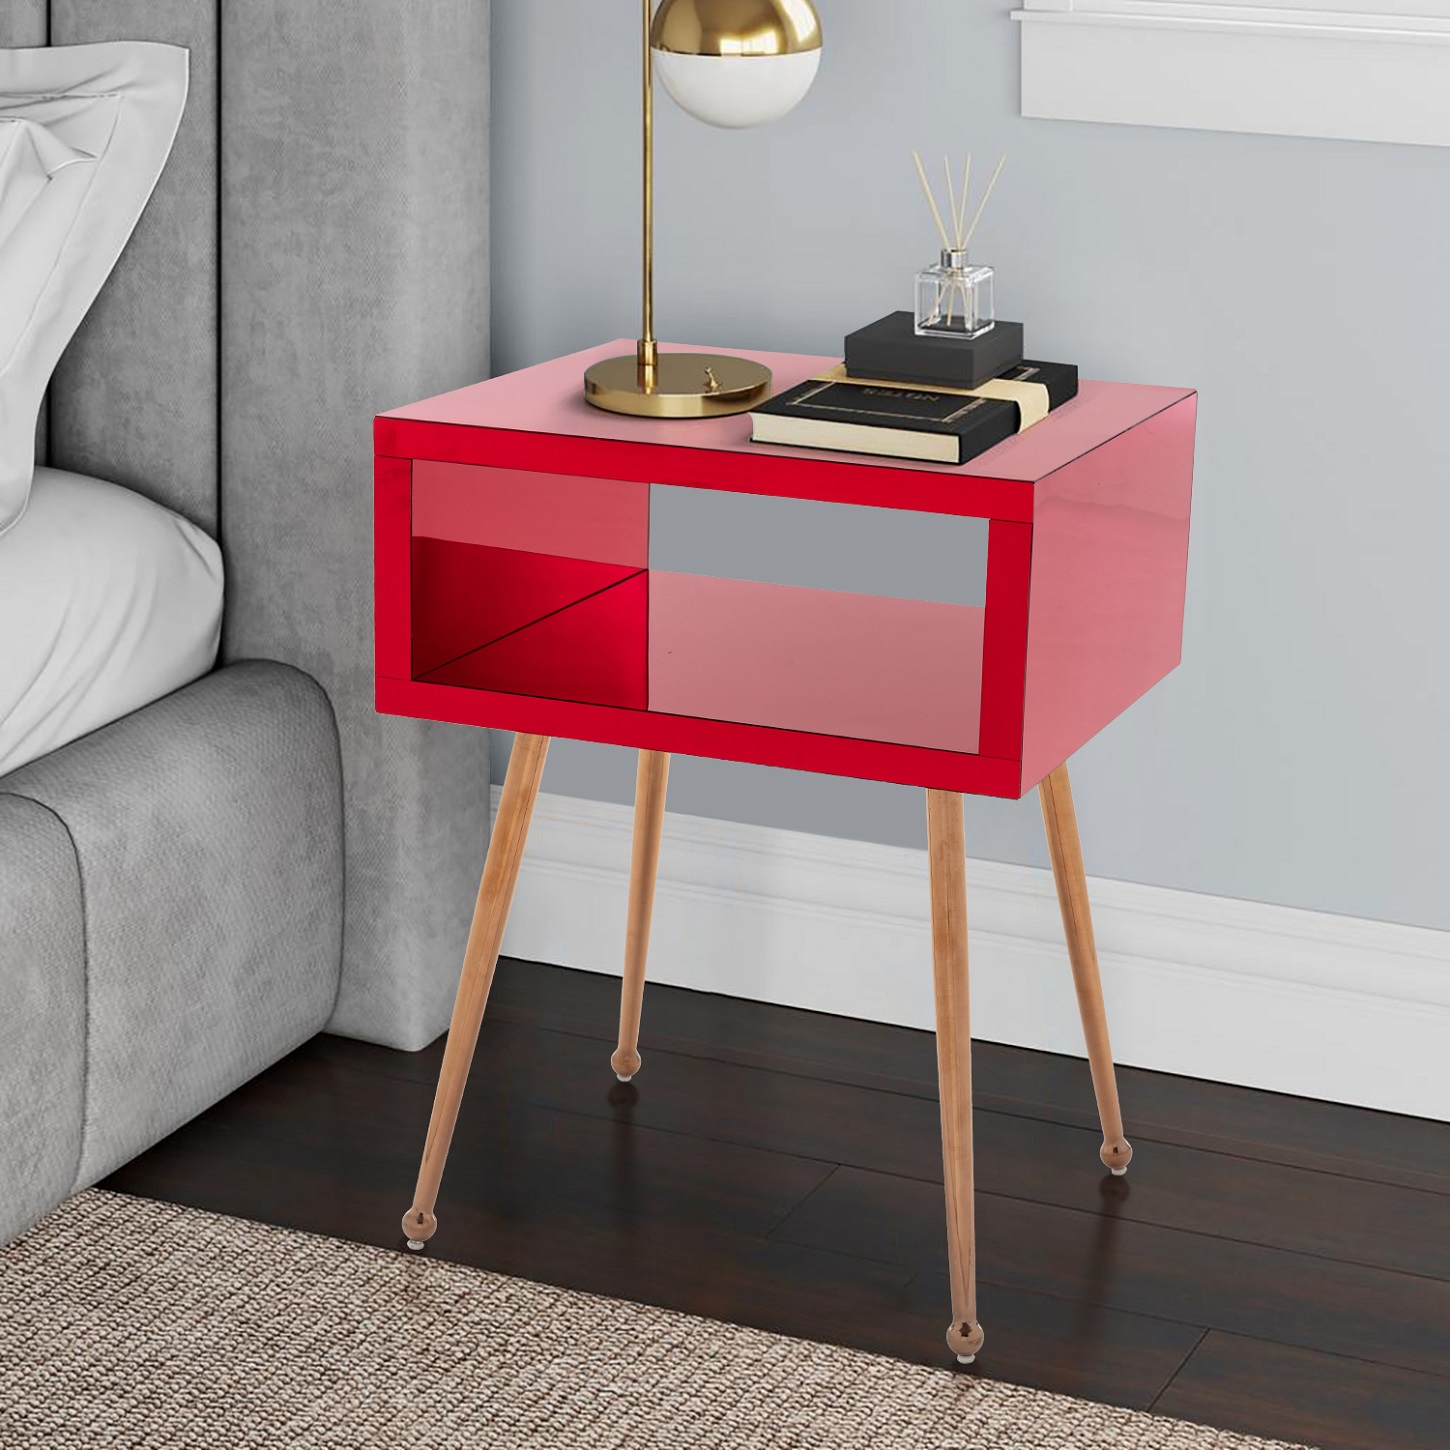 Esofastore Nightstands Minimal Assembly Required Sears